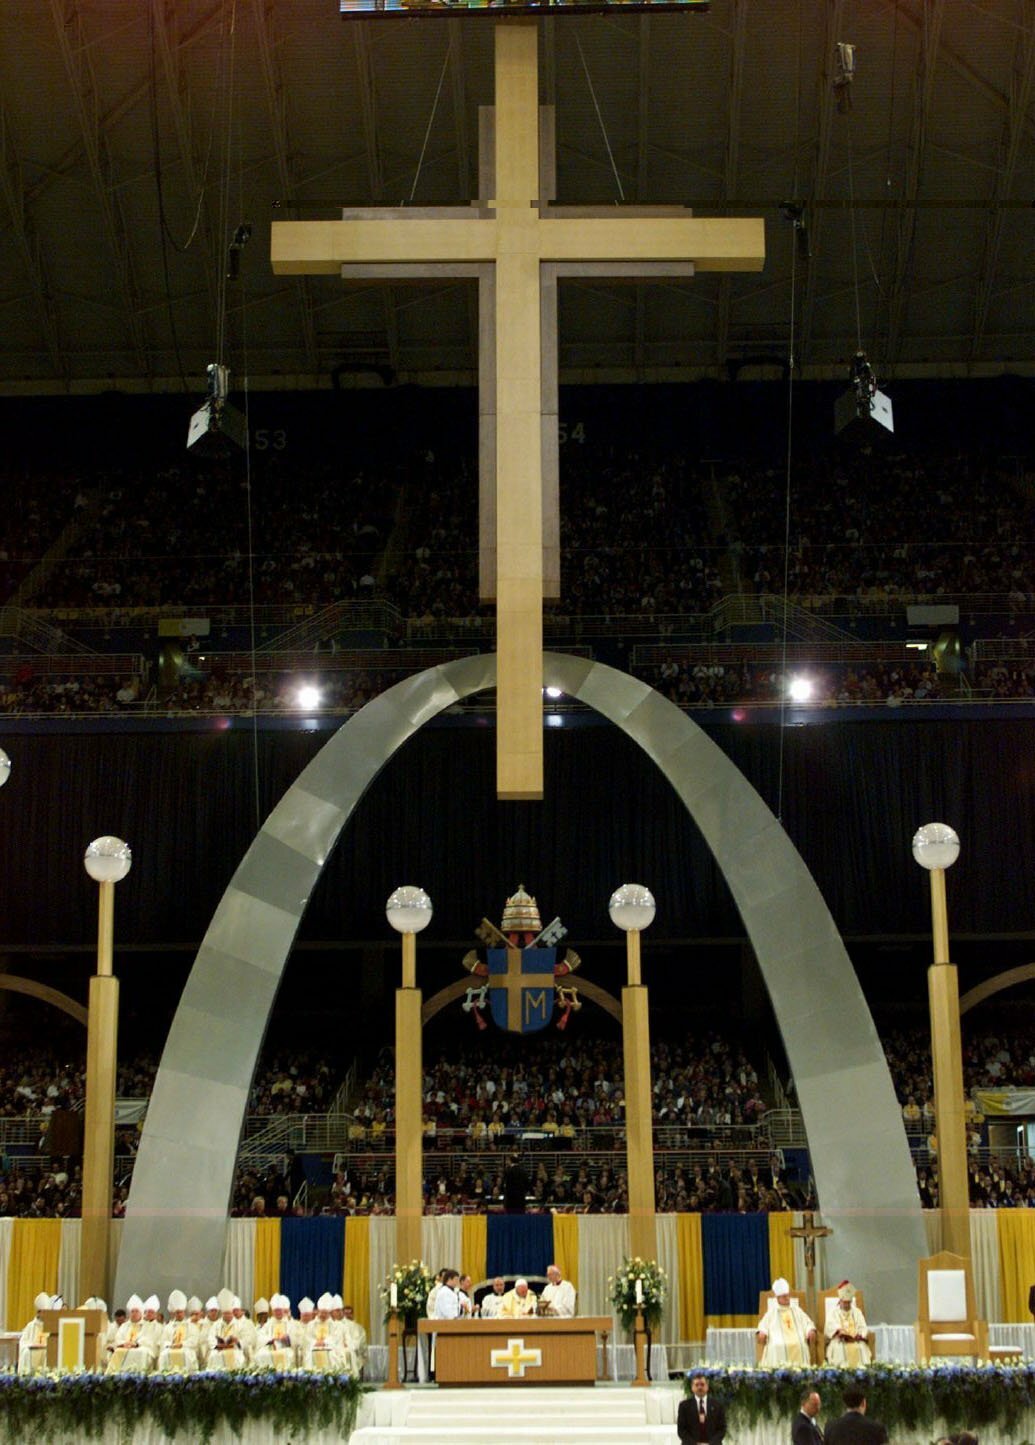 Pope John Paul II celebrates Mass Jan. 27, 1999, in the Trans World Dome under an arch built to resemble the Gateway Arch in St. Louis.